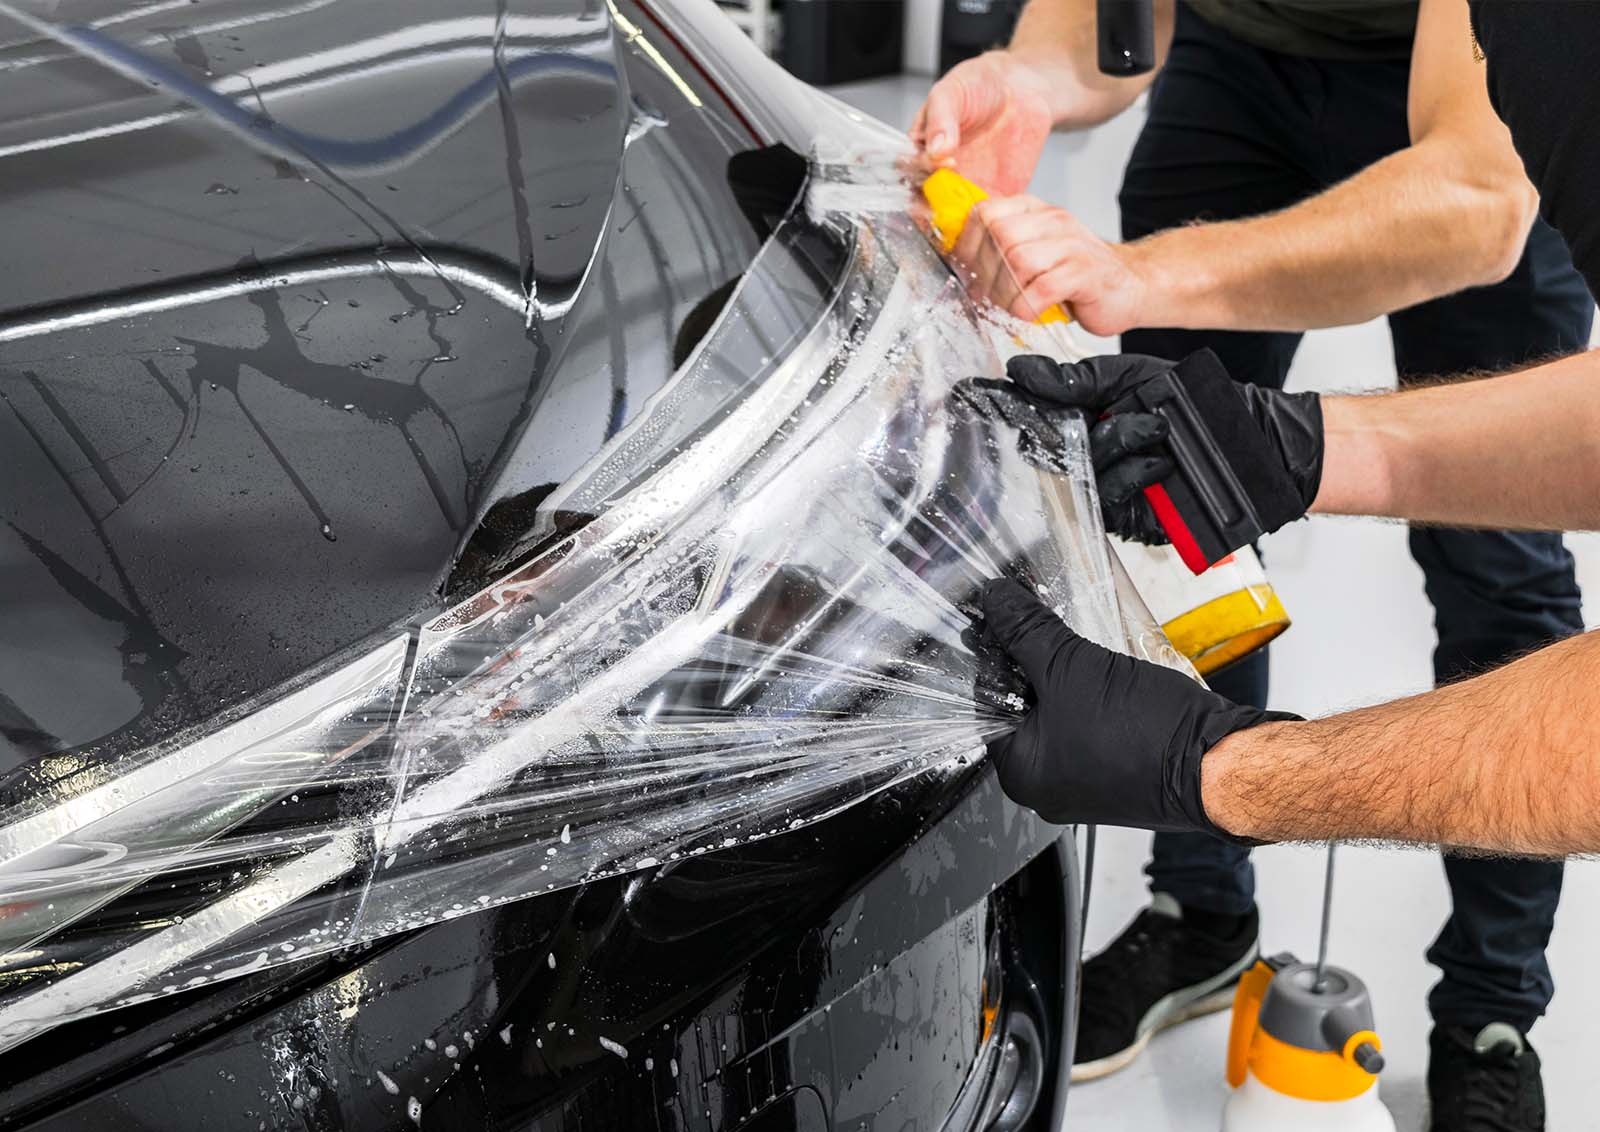 Paint Protection Film Training, Avery Dennison